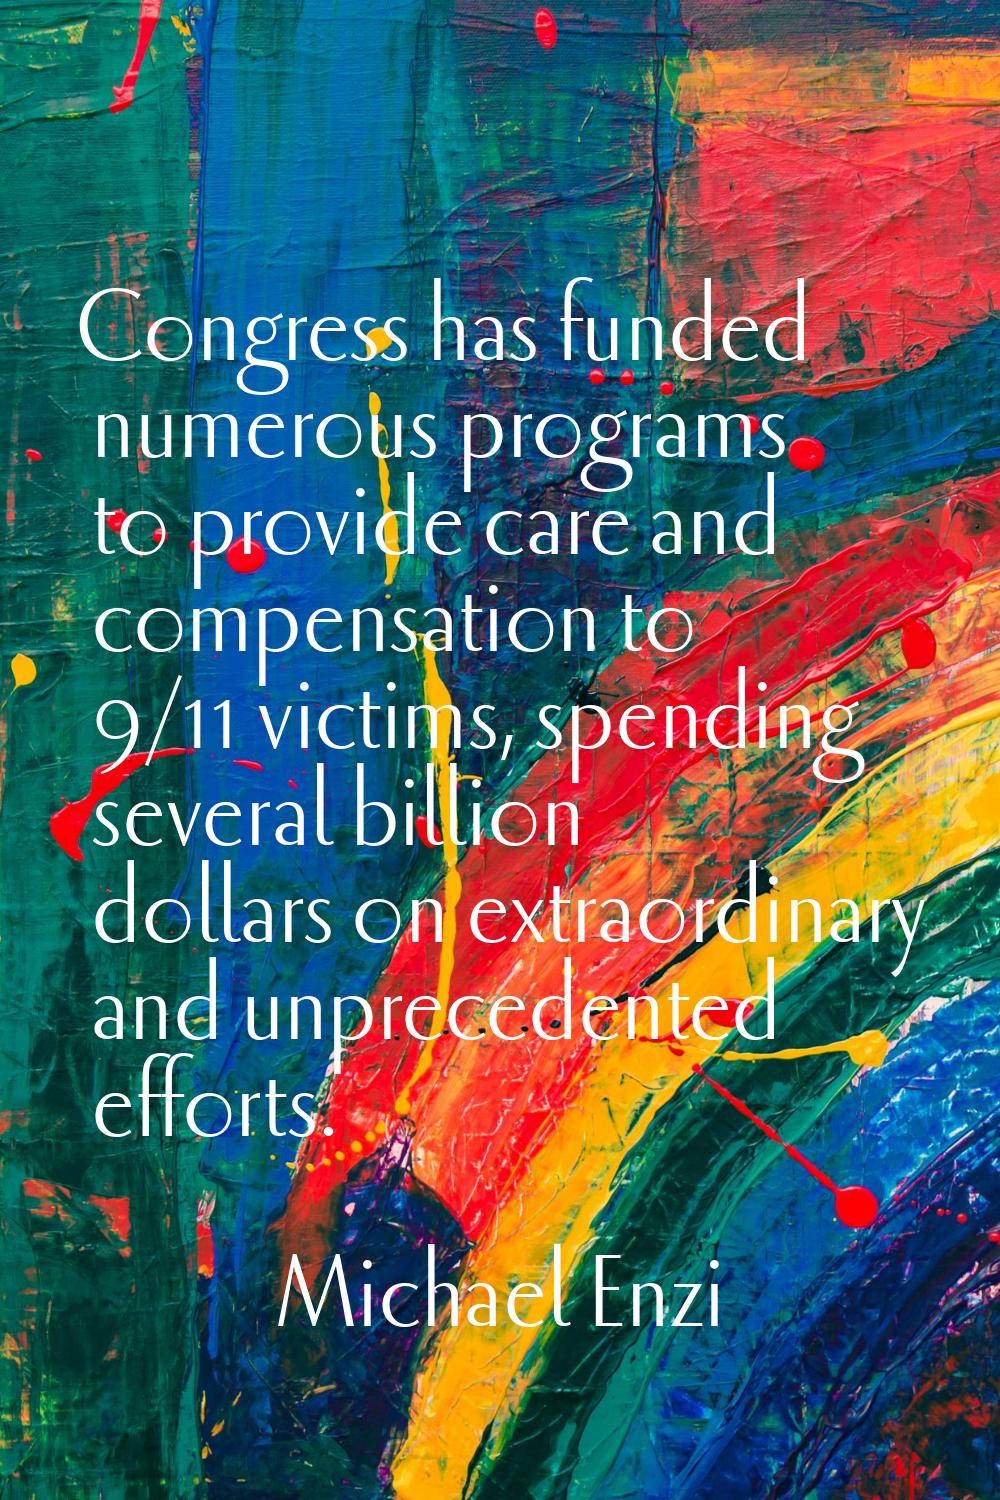 Congress has funded numerous programs to provide care and compensation to 9/11 victims, spending se